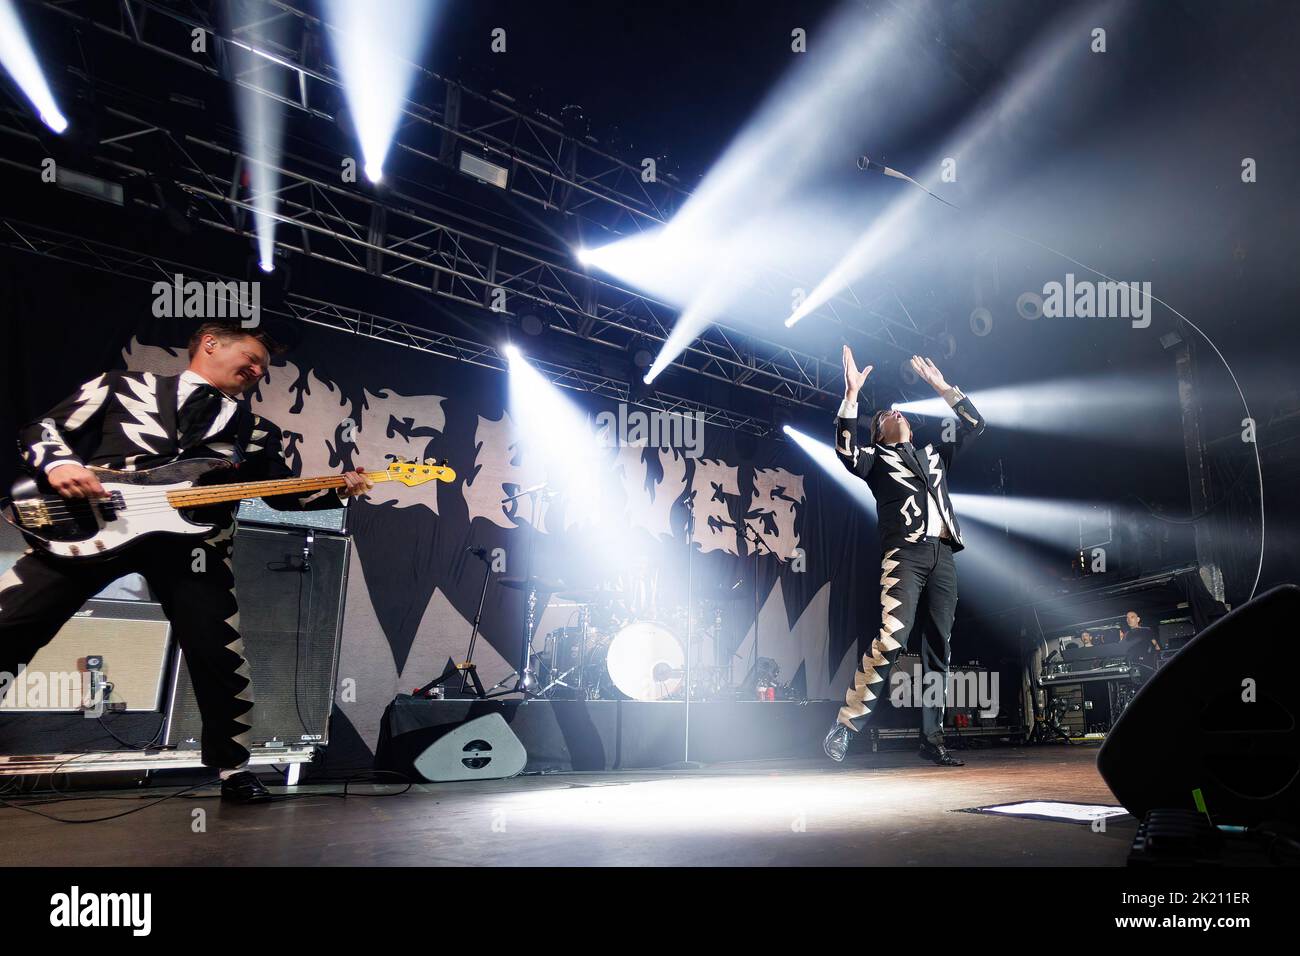 BARCELONA - SEP 8: The Hives (rock band from Sweden) perform on stage at Razzmatazz on September 8, 2022 in Barcelona, Spain. Stock Photo